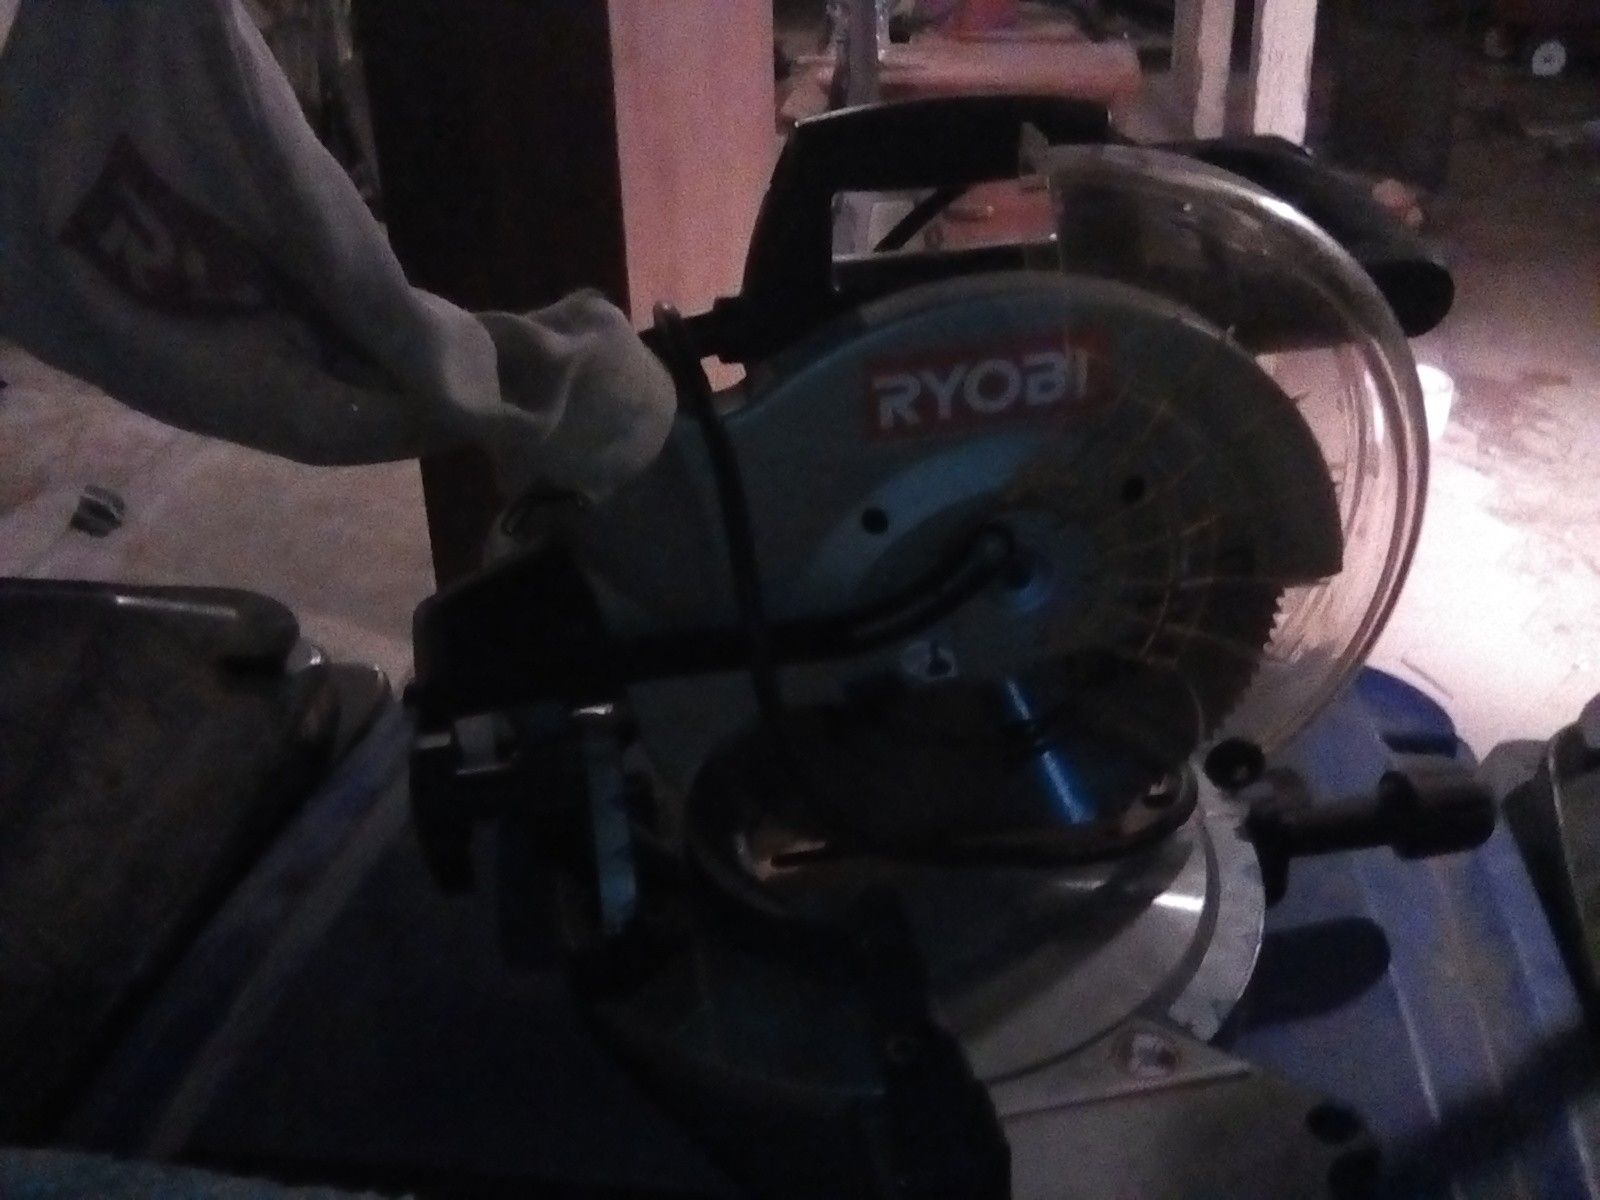 The RYOBI 14 Amp 10 in. Compound Miter Saw is built around a heavy-duty motor